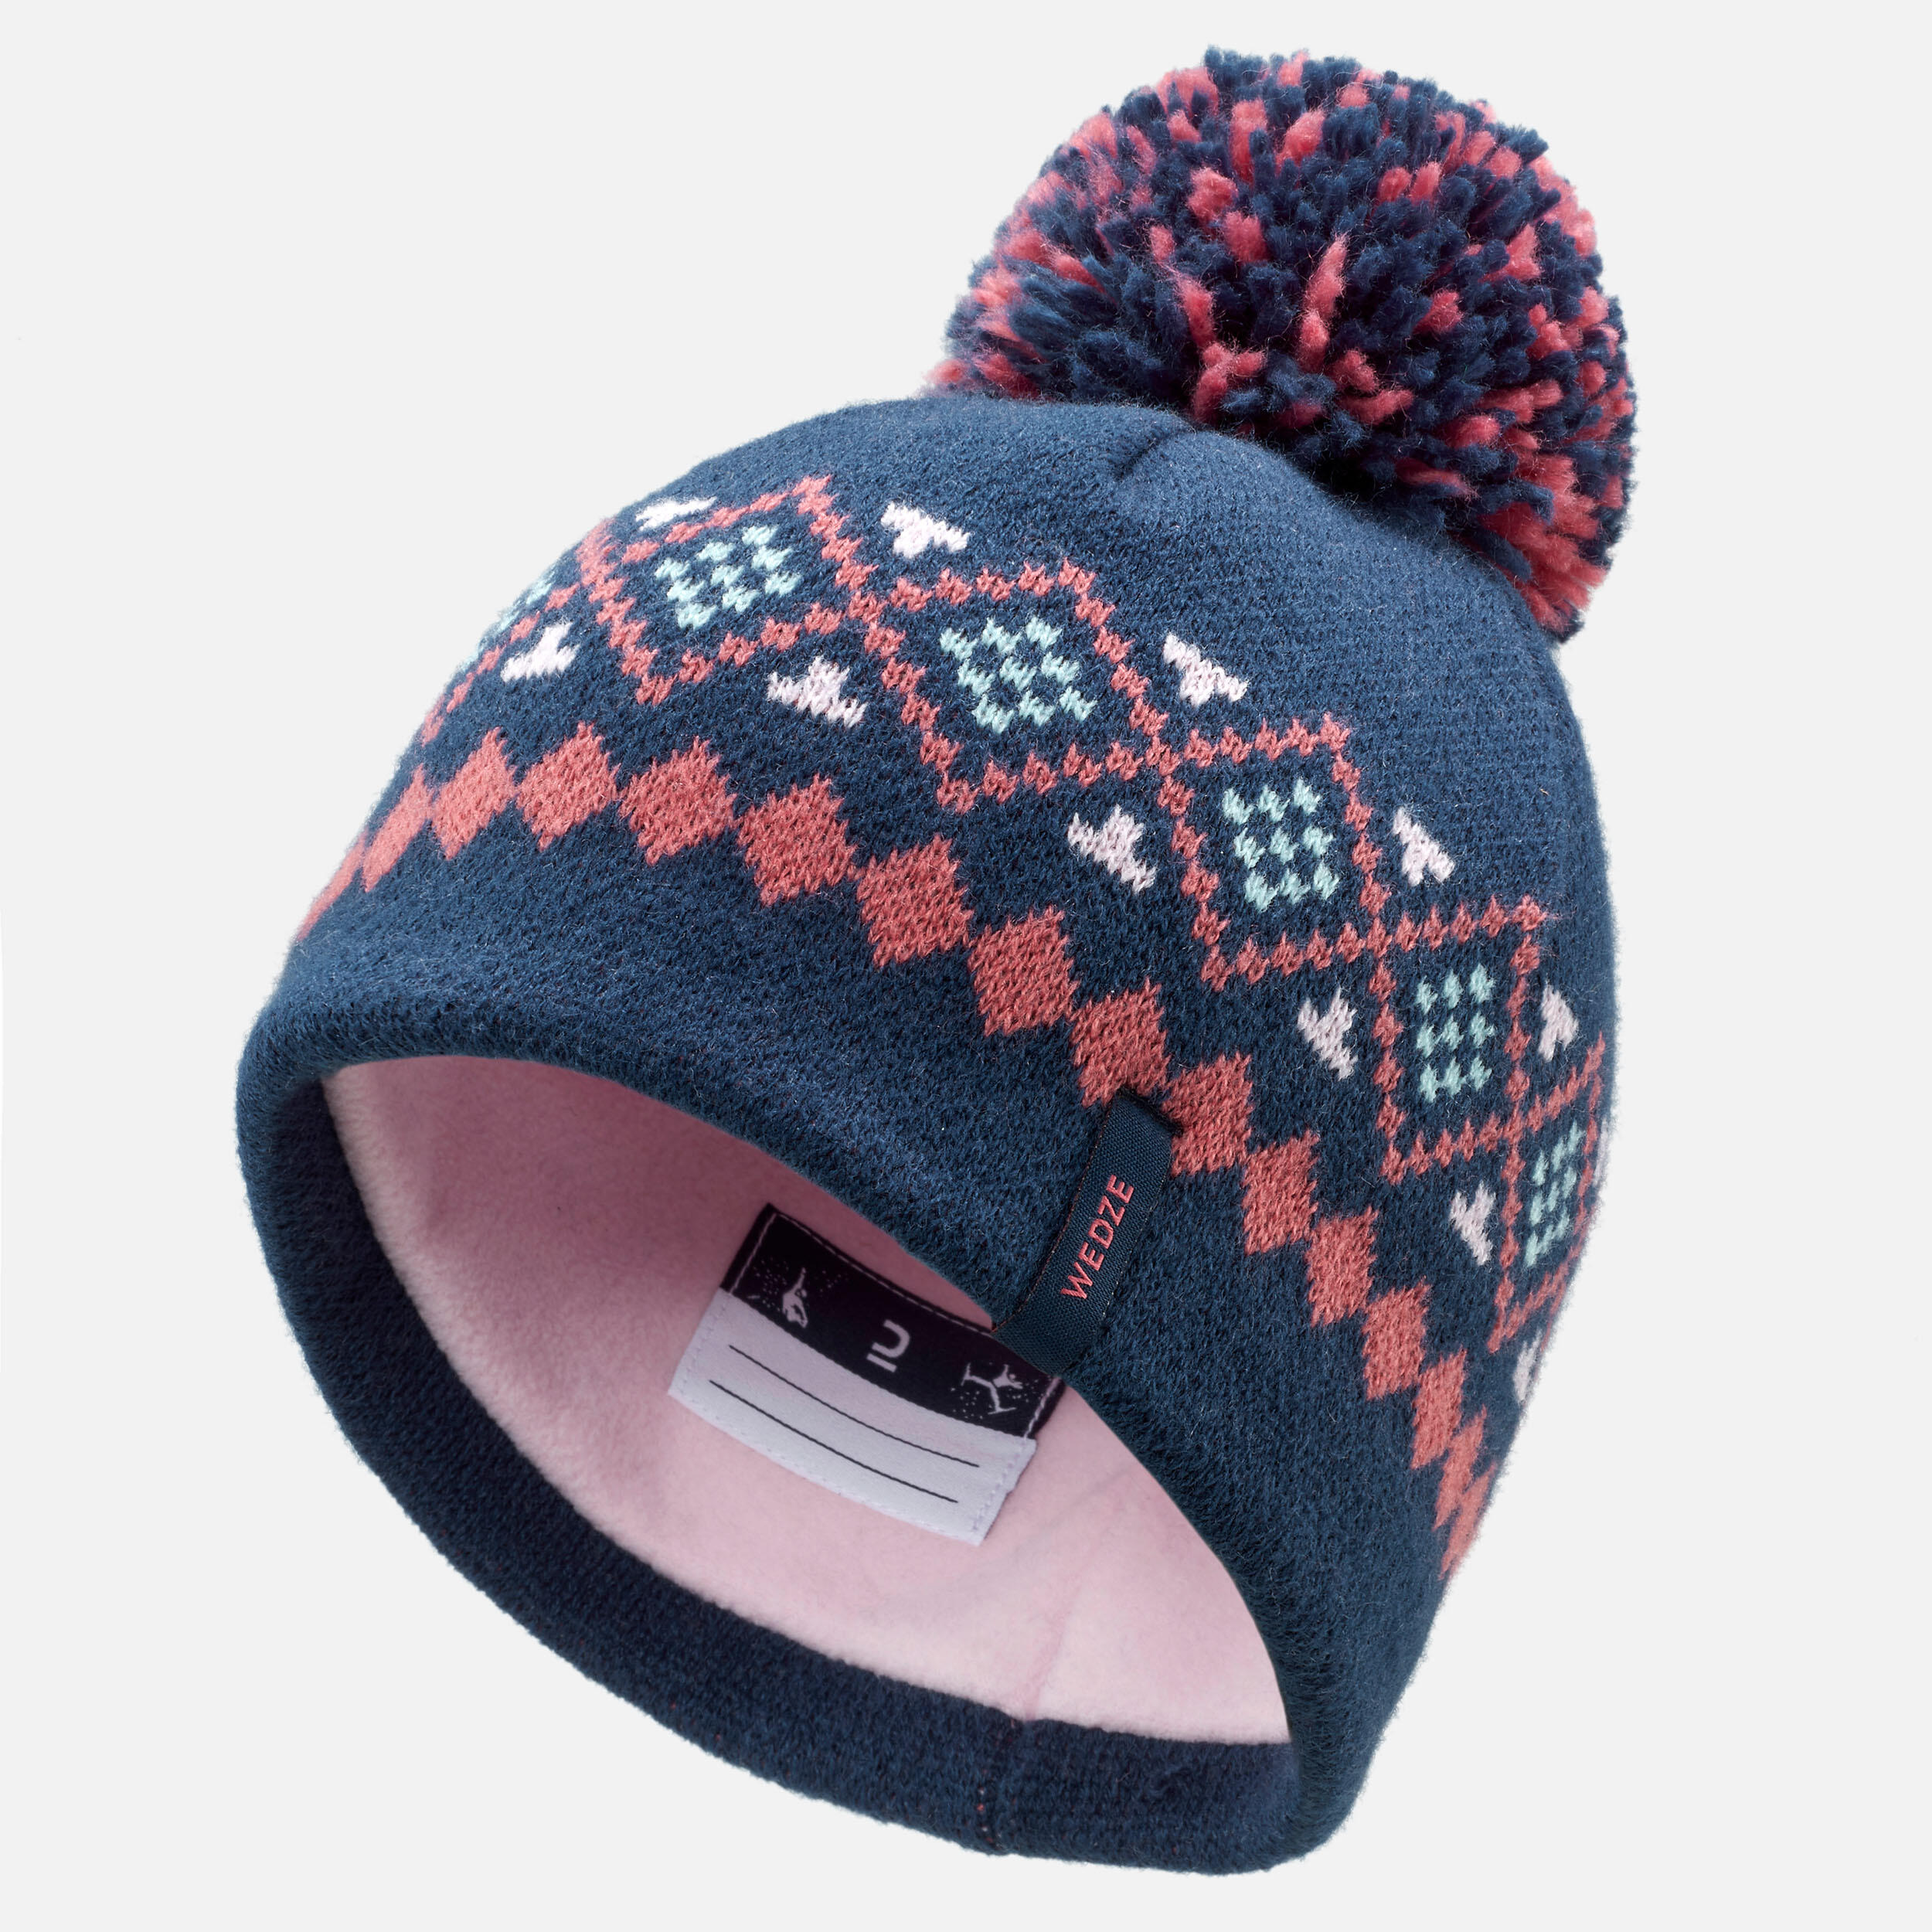 Baby ski/sledge hat and neck warmer - WARM navy blue and pink 6/11